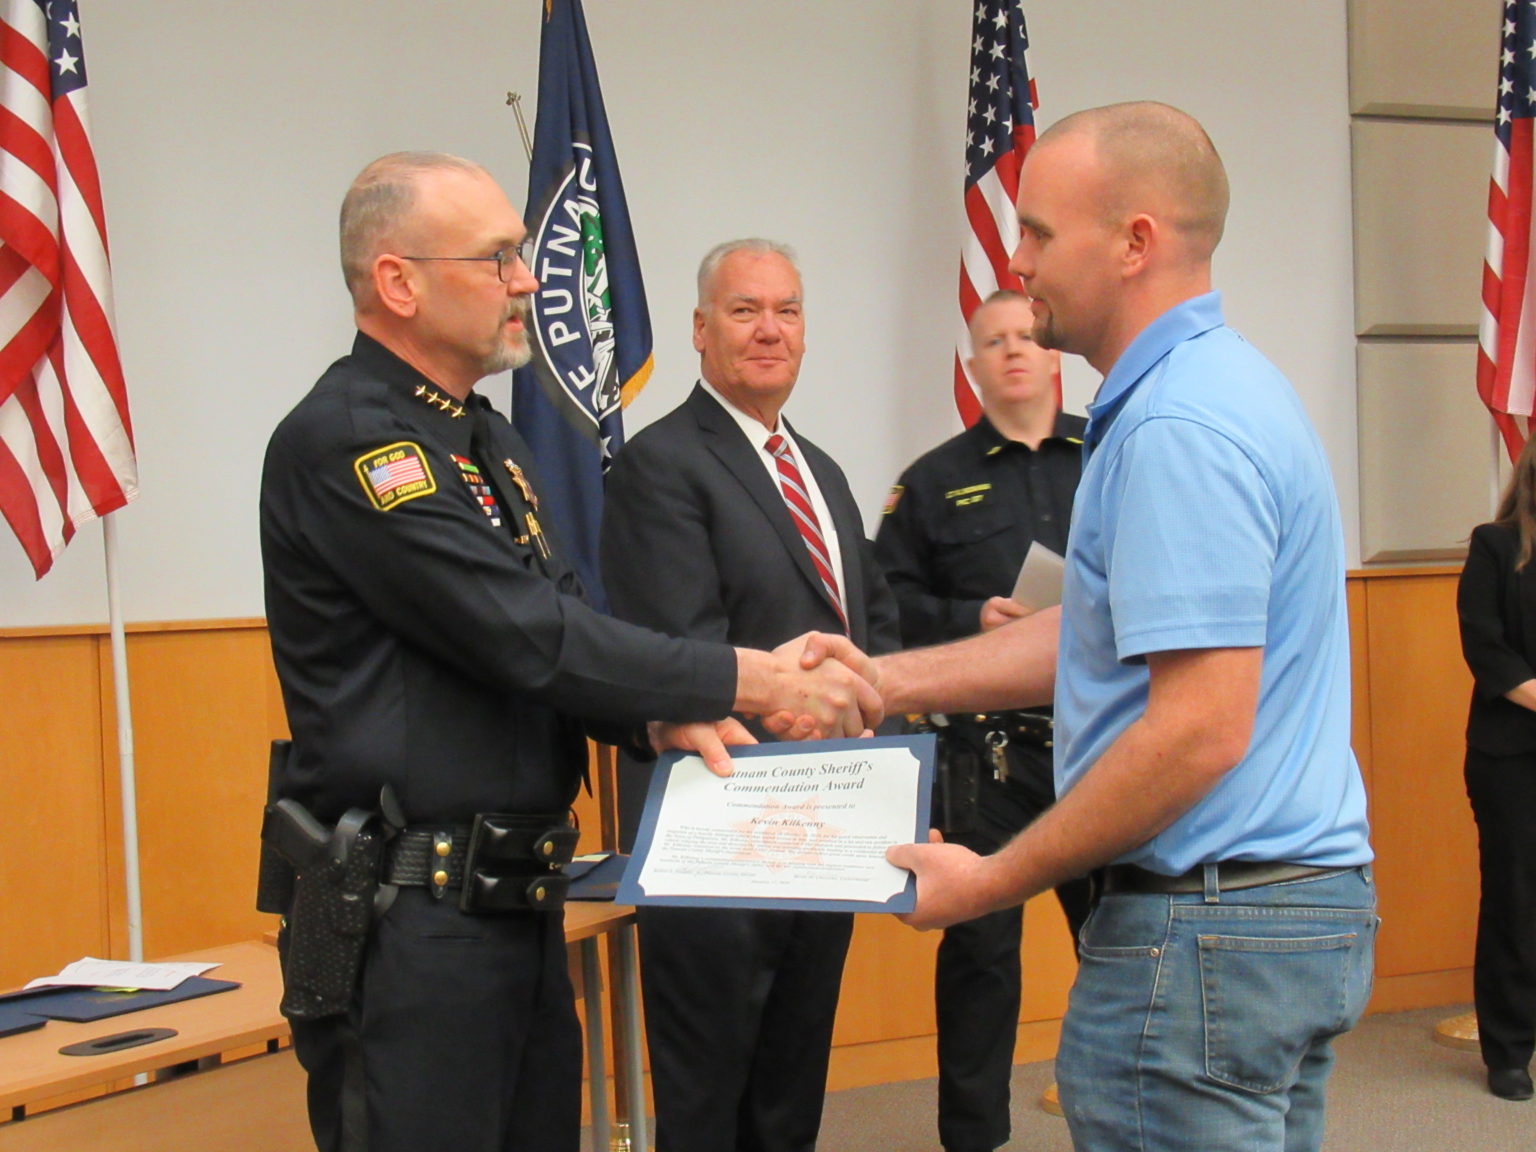 Promotions and recognitions at the Putnam County Sheriff’s Office Mid